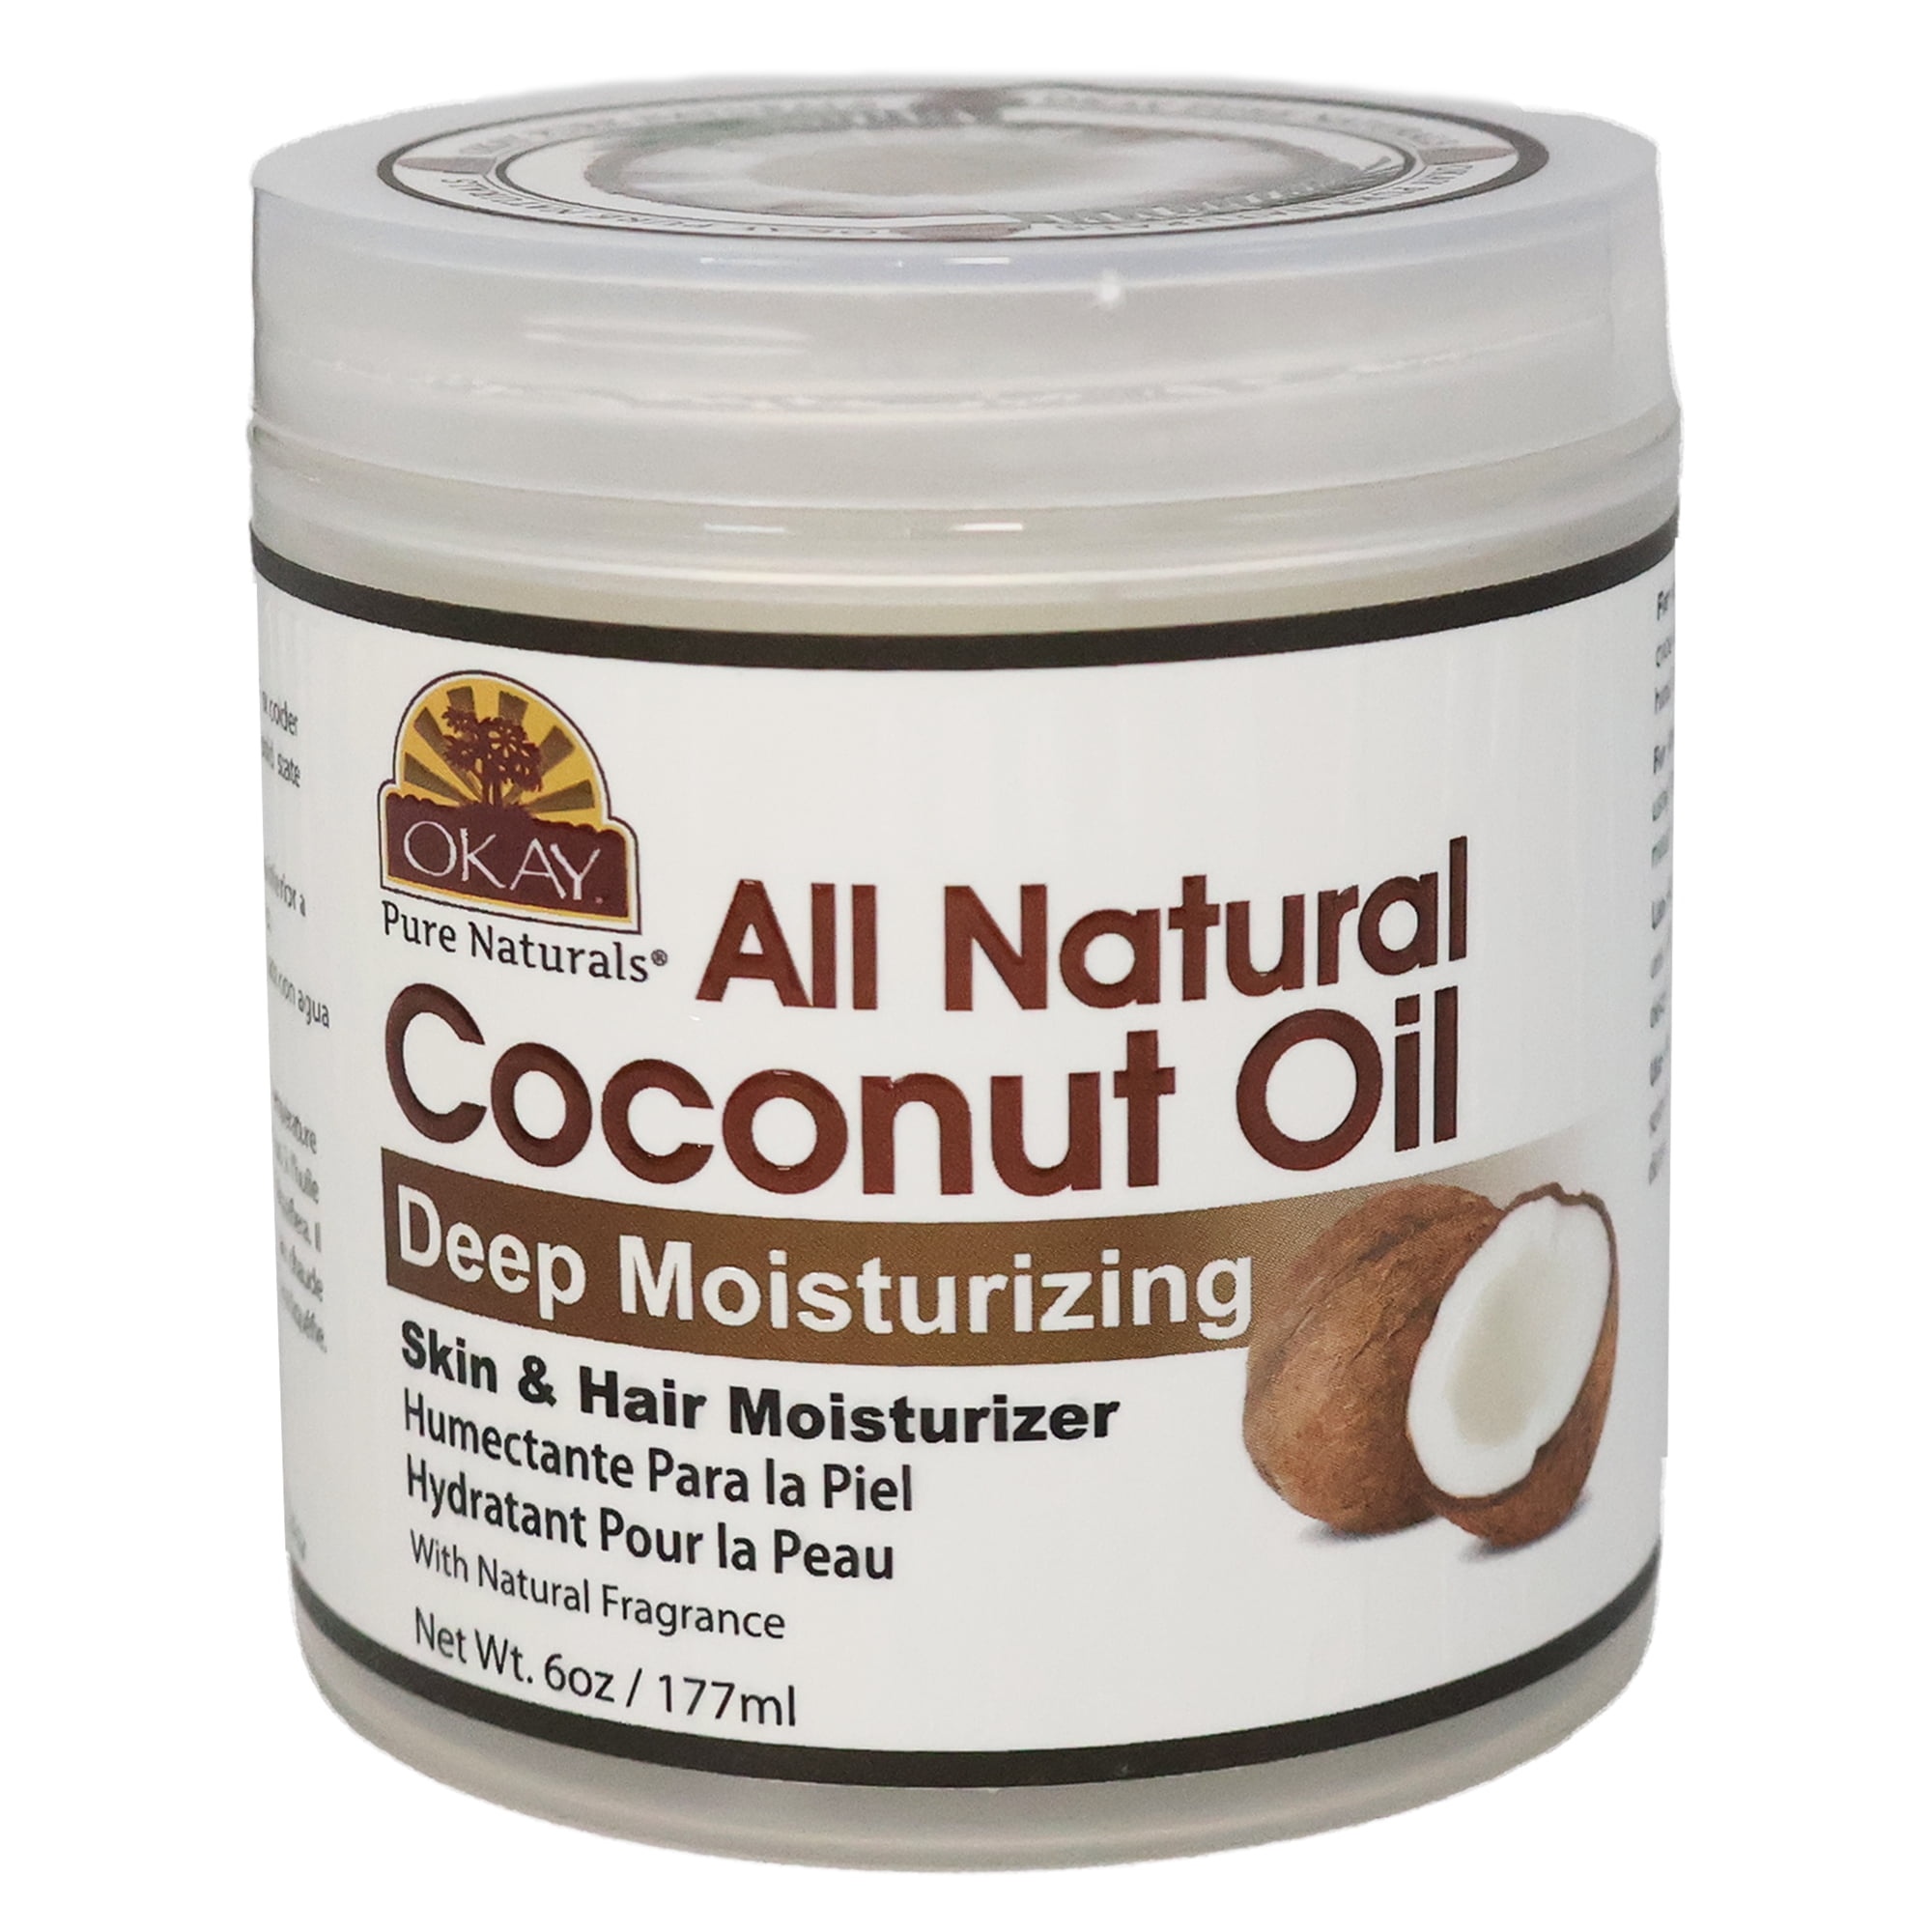 How and When to Use Coconut Oil as a Natural Moisturizer